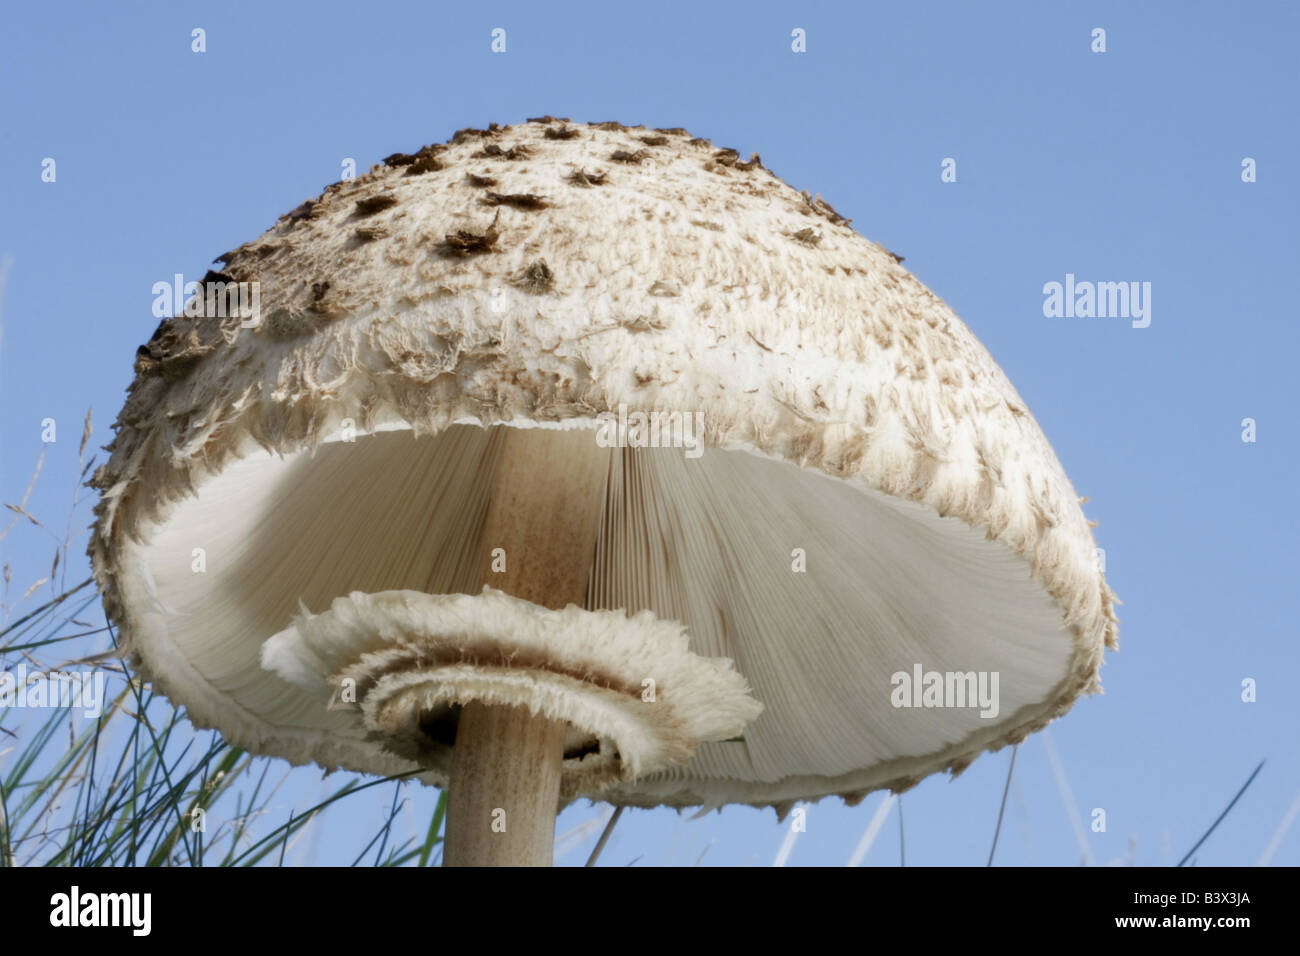 Shaggy Parasol, macrolepiota rhacodes, viewed against a blue sky, showing white gills Stock Photo